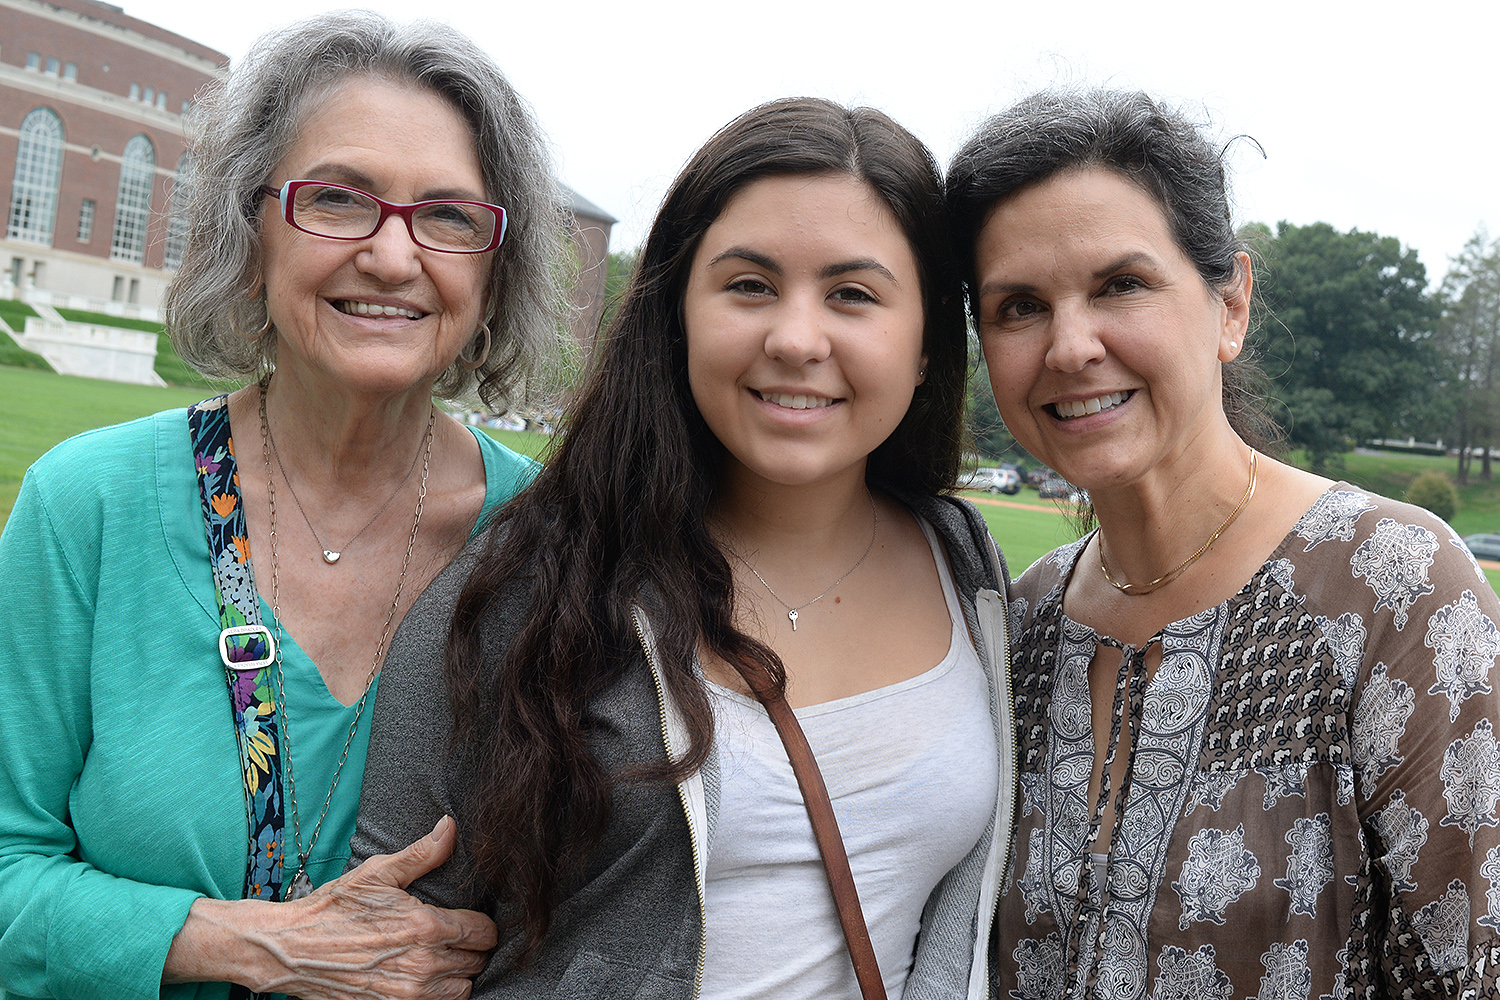 Lily Davis ’20, center, from Portland, Ore., gets move-in help from her mother Gia Pitillo and grandmother Elizabeth Pitillo. Truly a special moment to see three generations on Arrival Day.